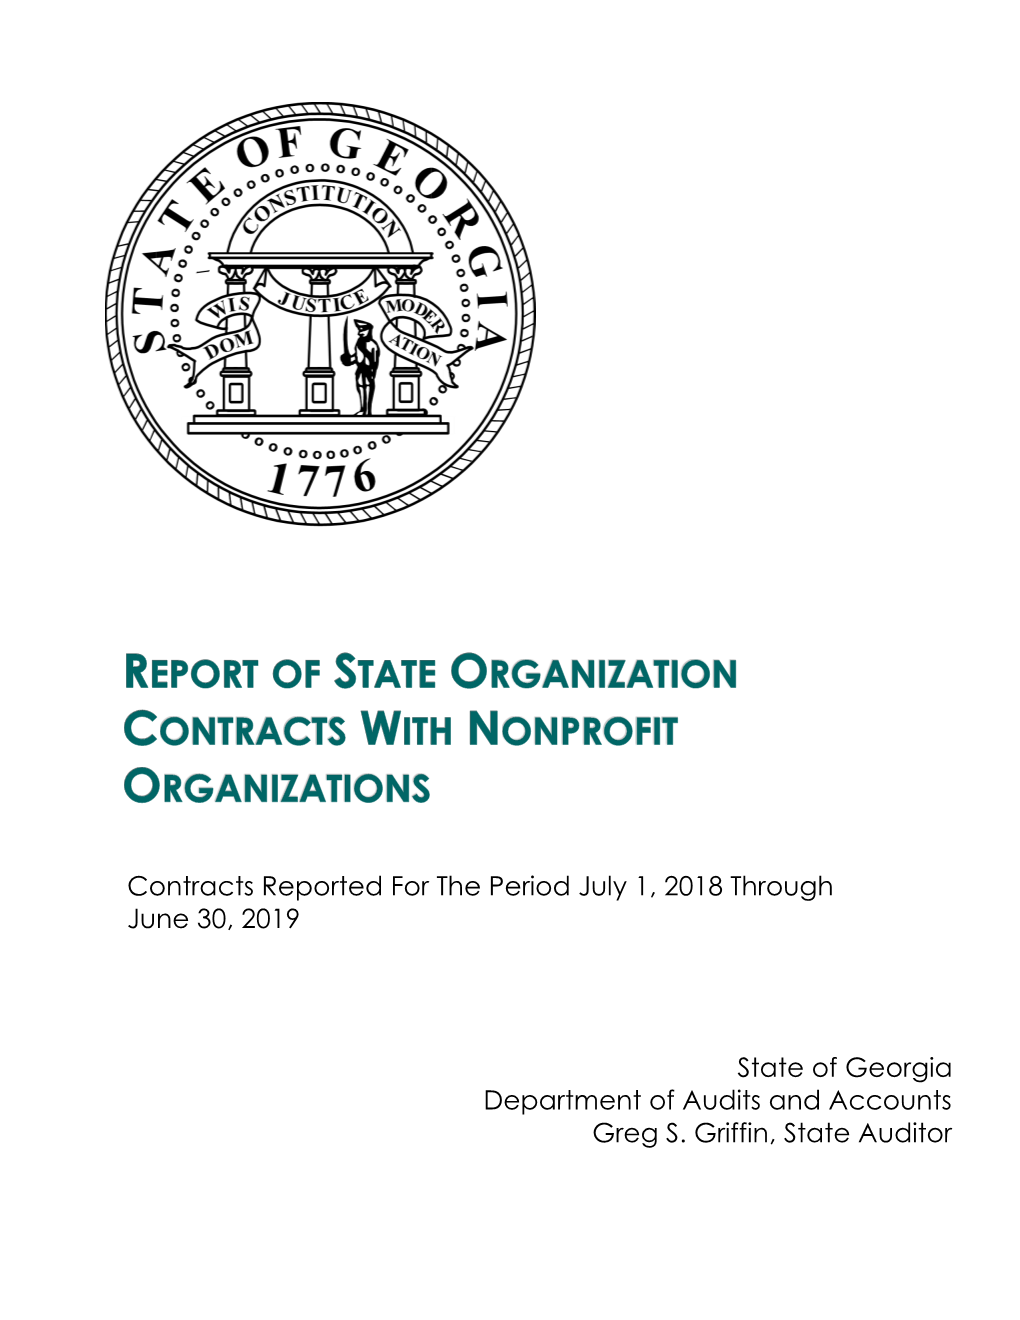 Report of State Organization Contracts with Nonprofit Organizations